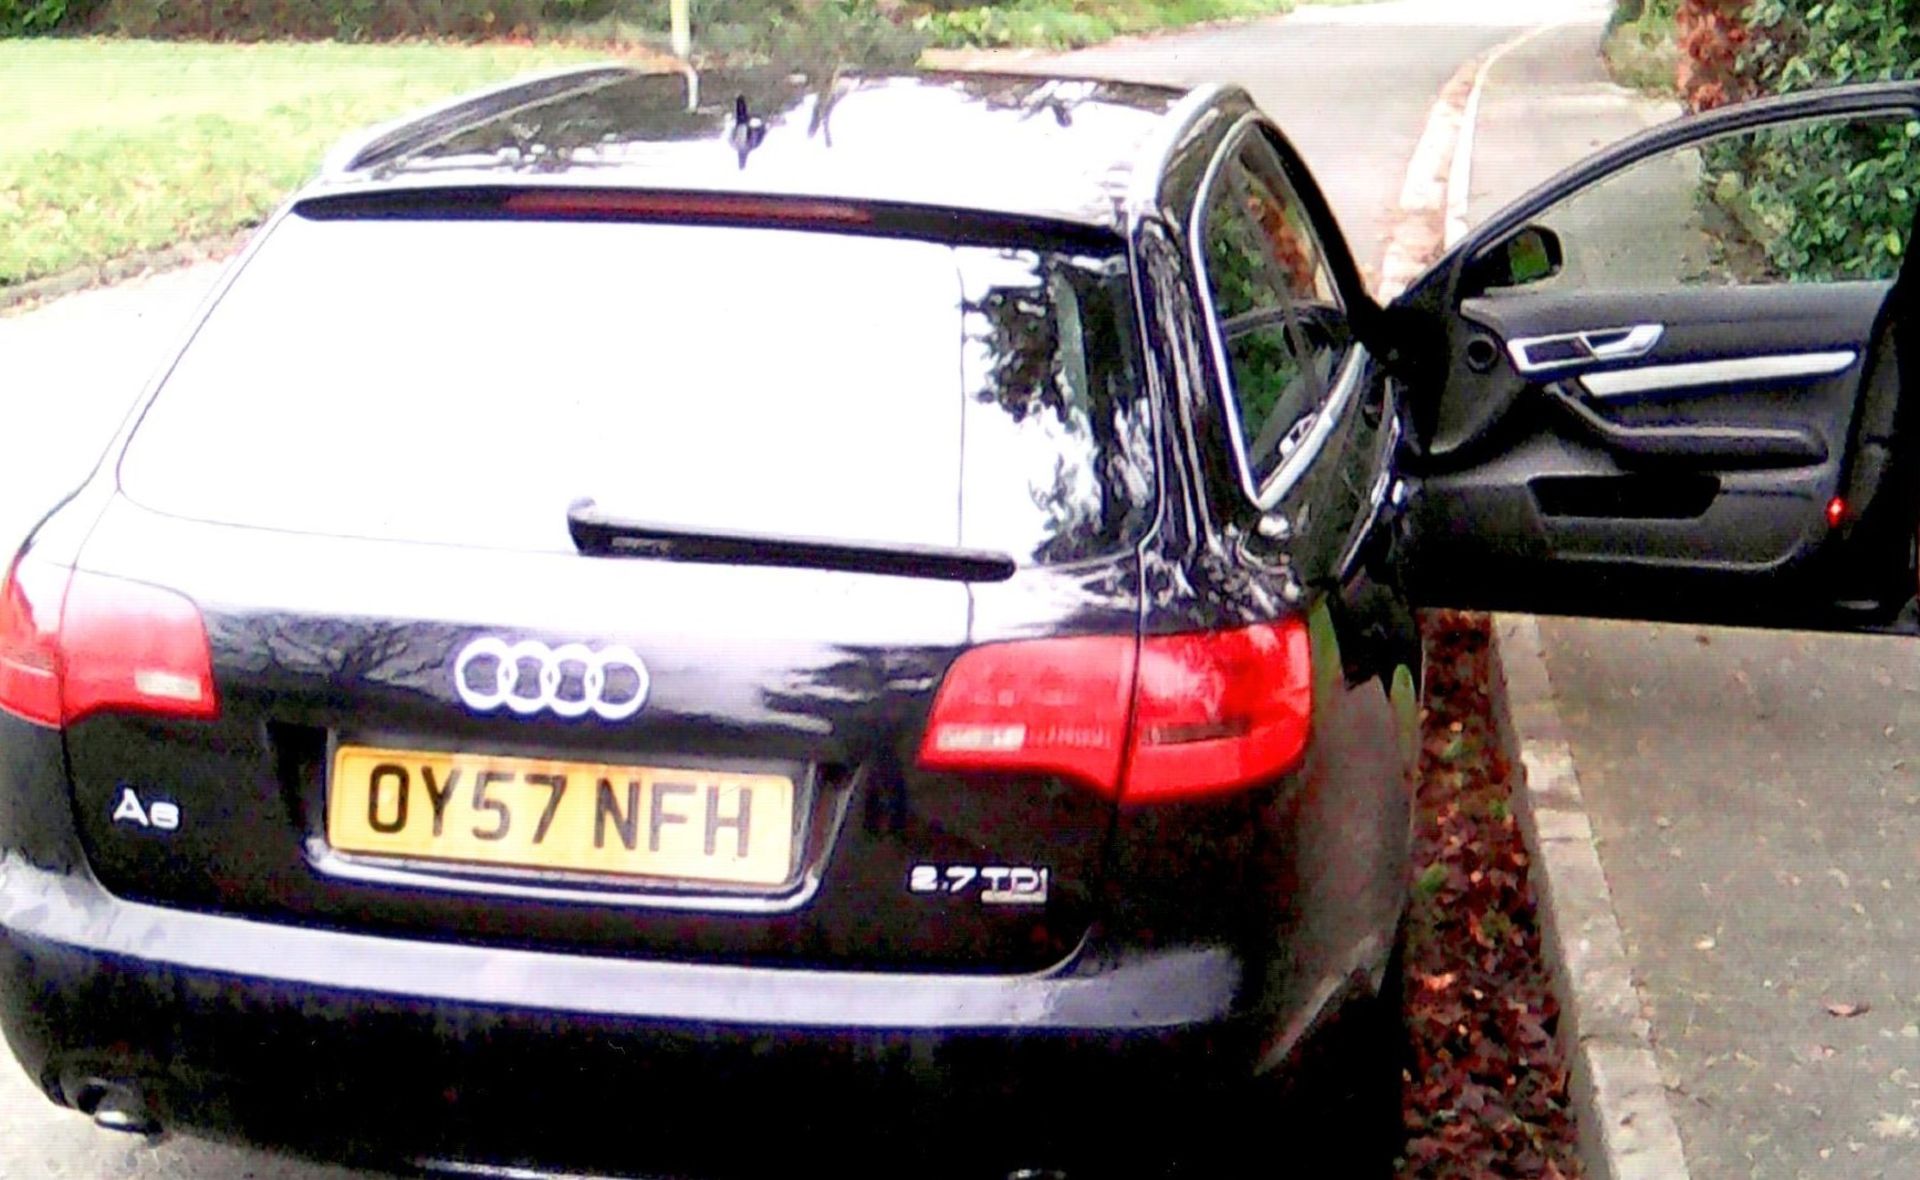 2007 Audi A6 Avant 2.7 TDi Registration number OY57 NFH Chassis number WAUZZZ4F58N016755 Engine - Image 12 of 17